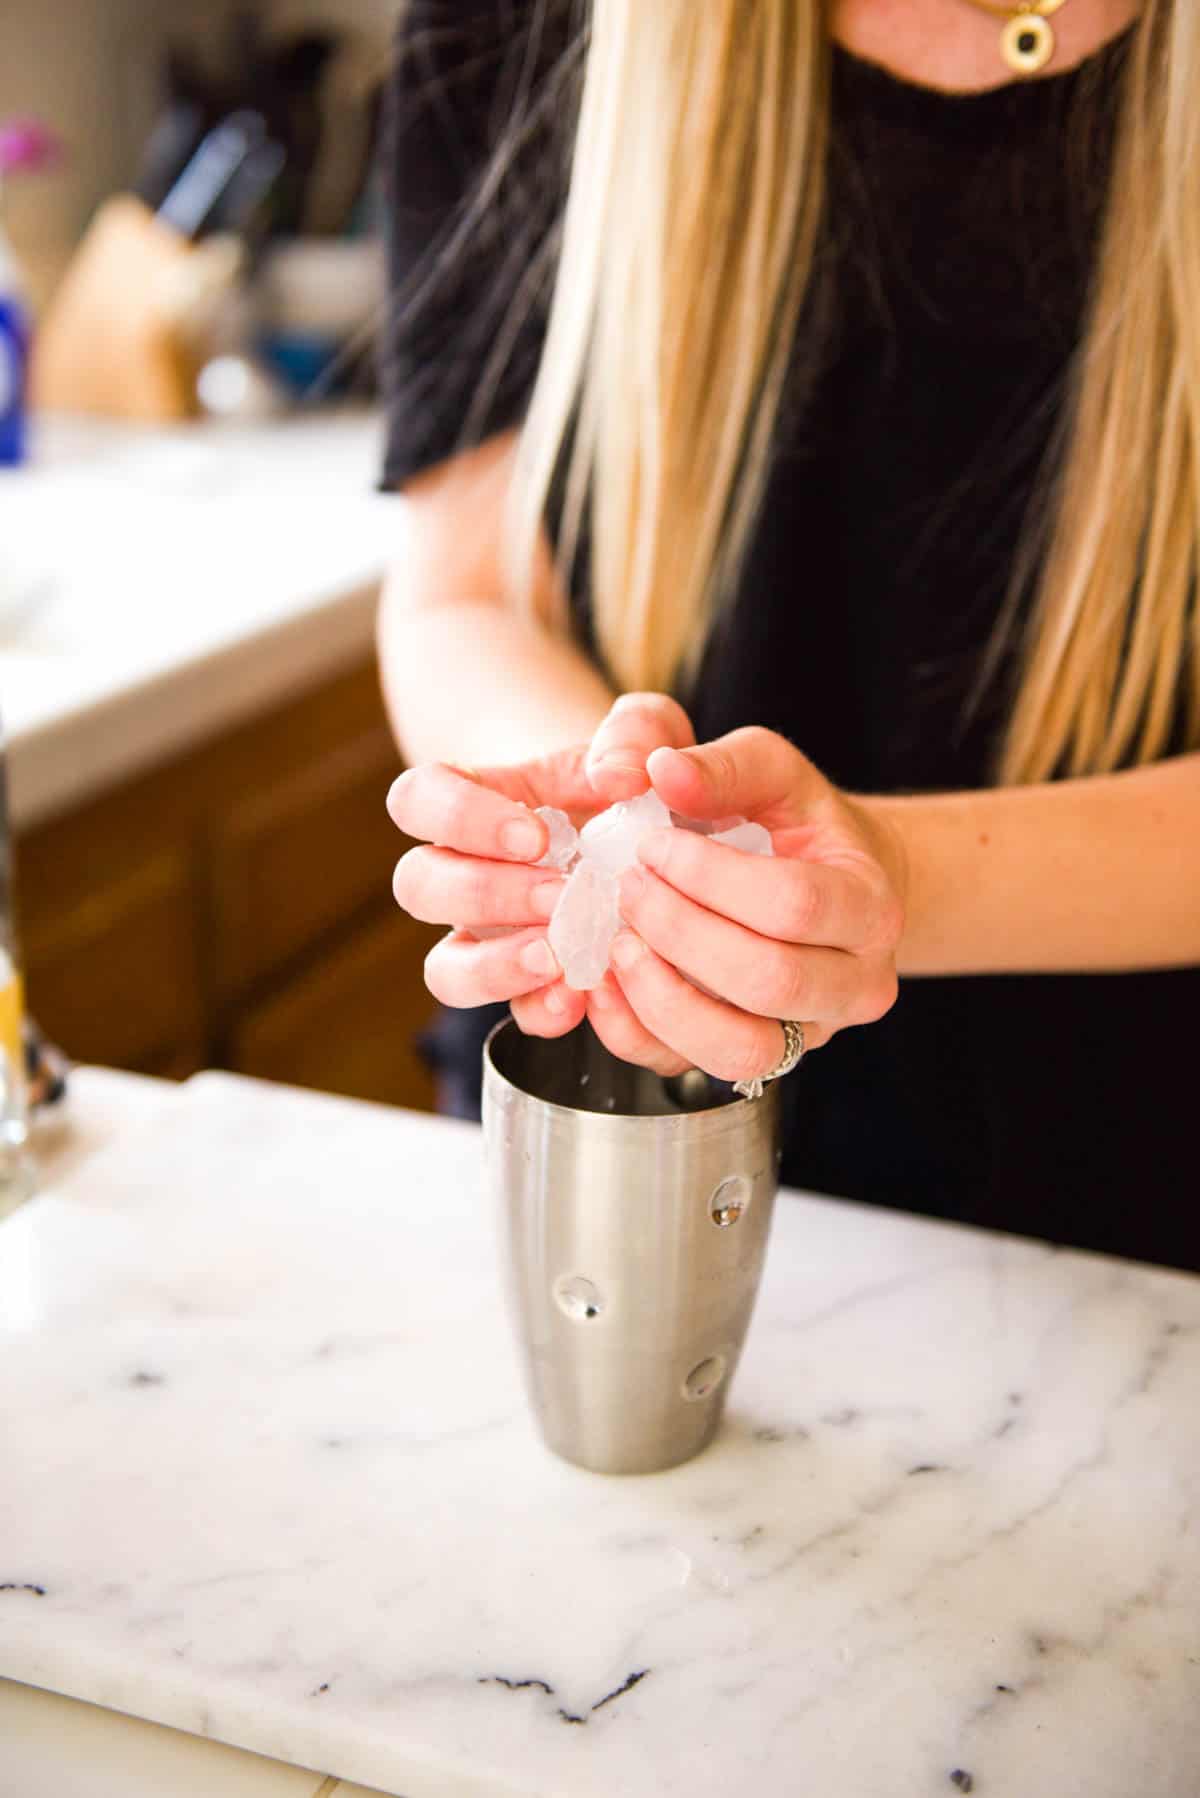 Adding ice to a cocktail shaker.